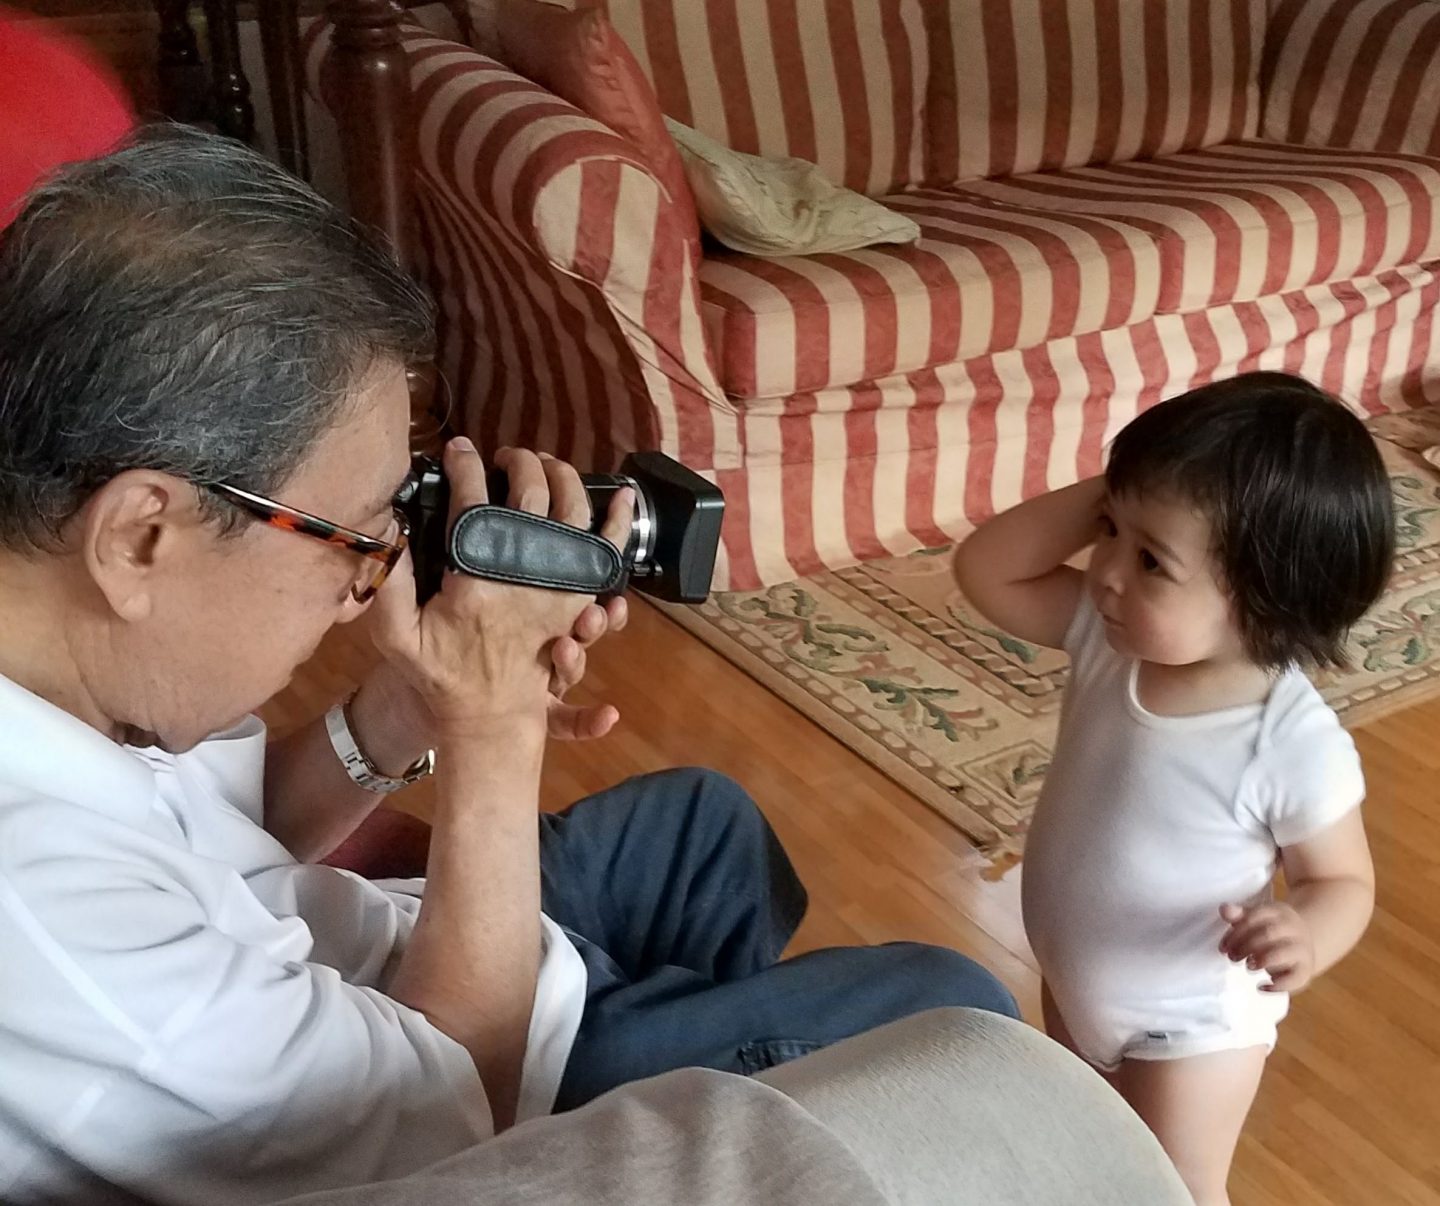 Filming his youngest grandchild in 2018, making home videos was a hobby my father enjoyed.